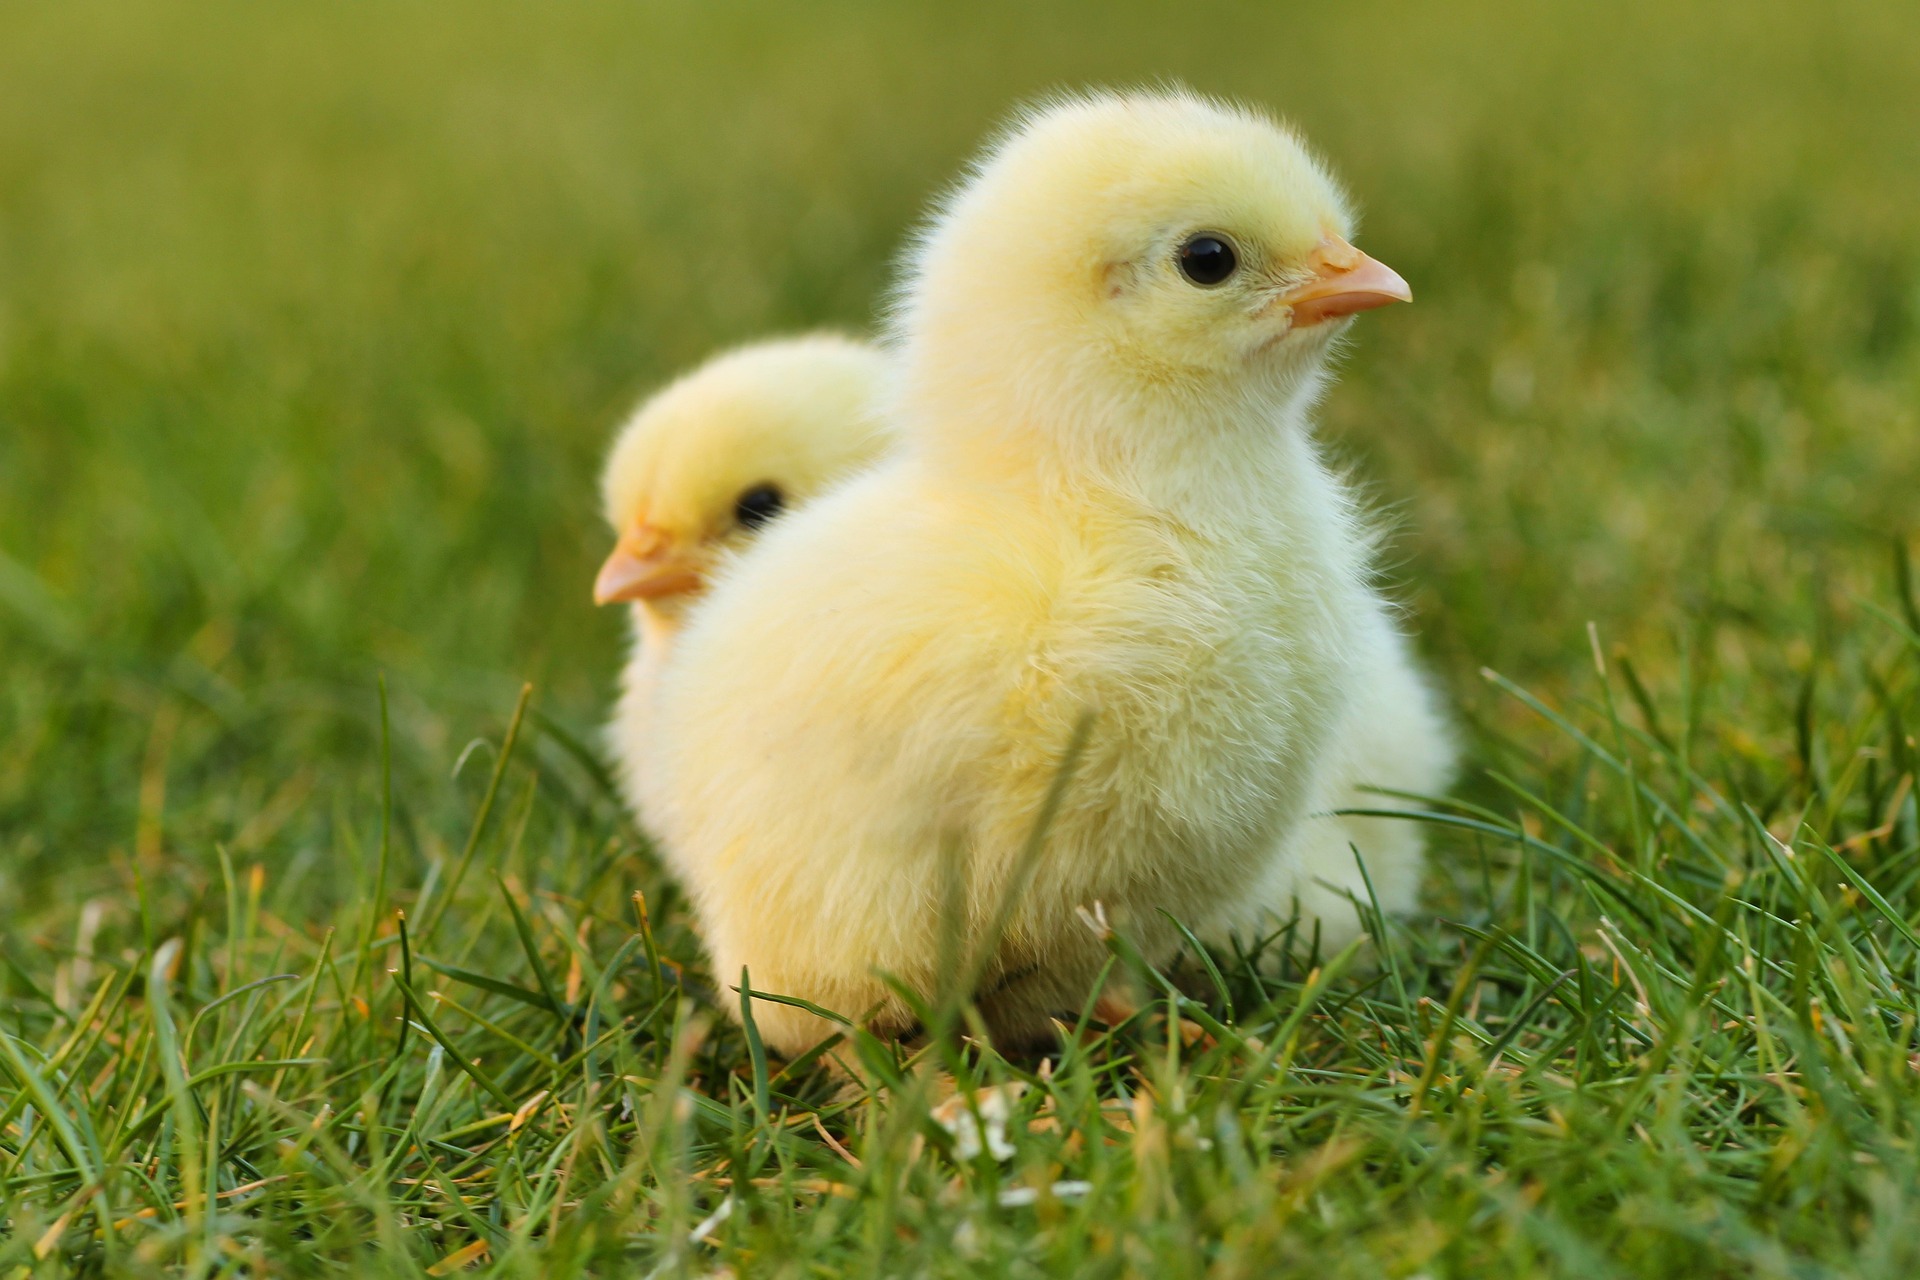 Baby chicks in a field of grass